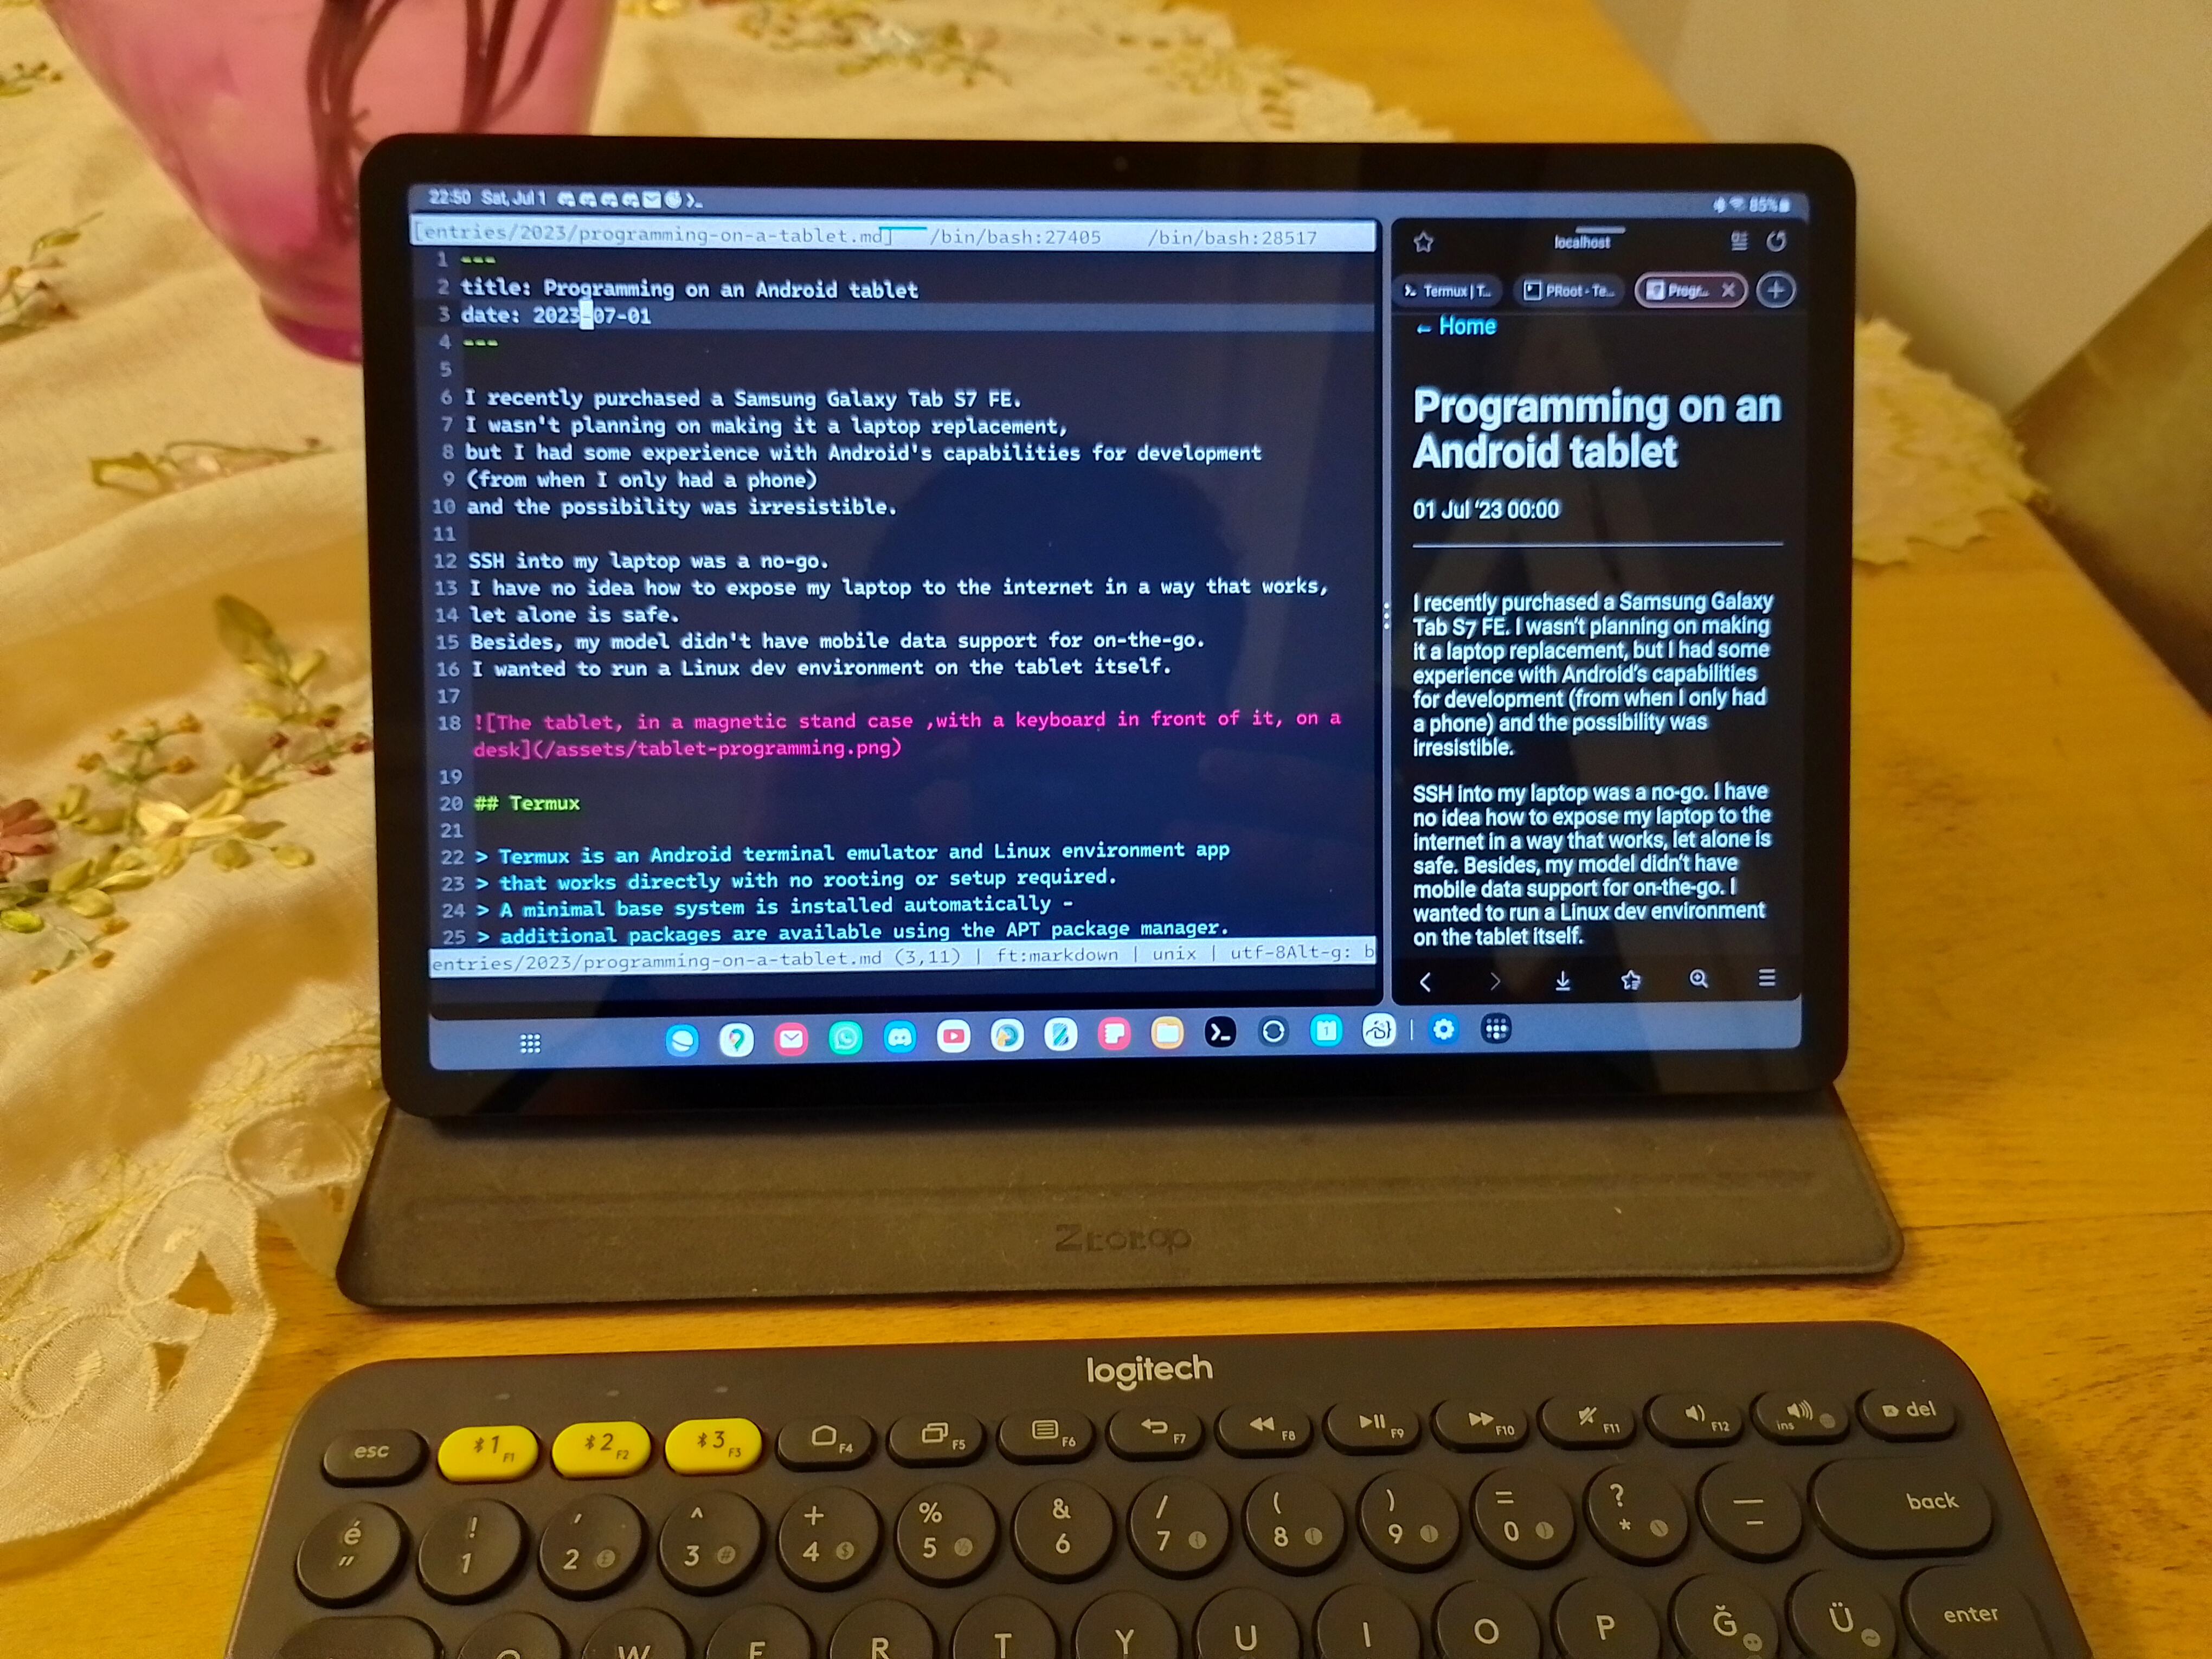 The tablet, in a magnetic stand case, with a keyboard in front of it, on a desk